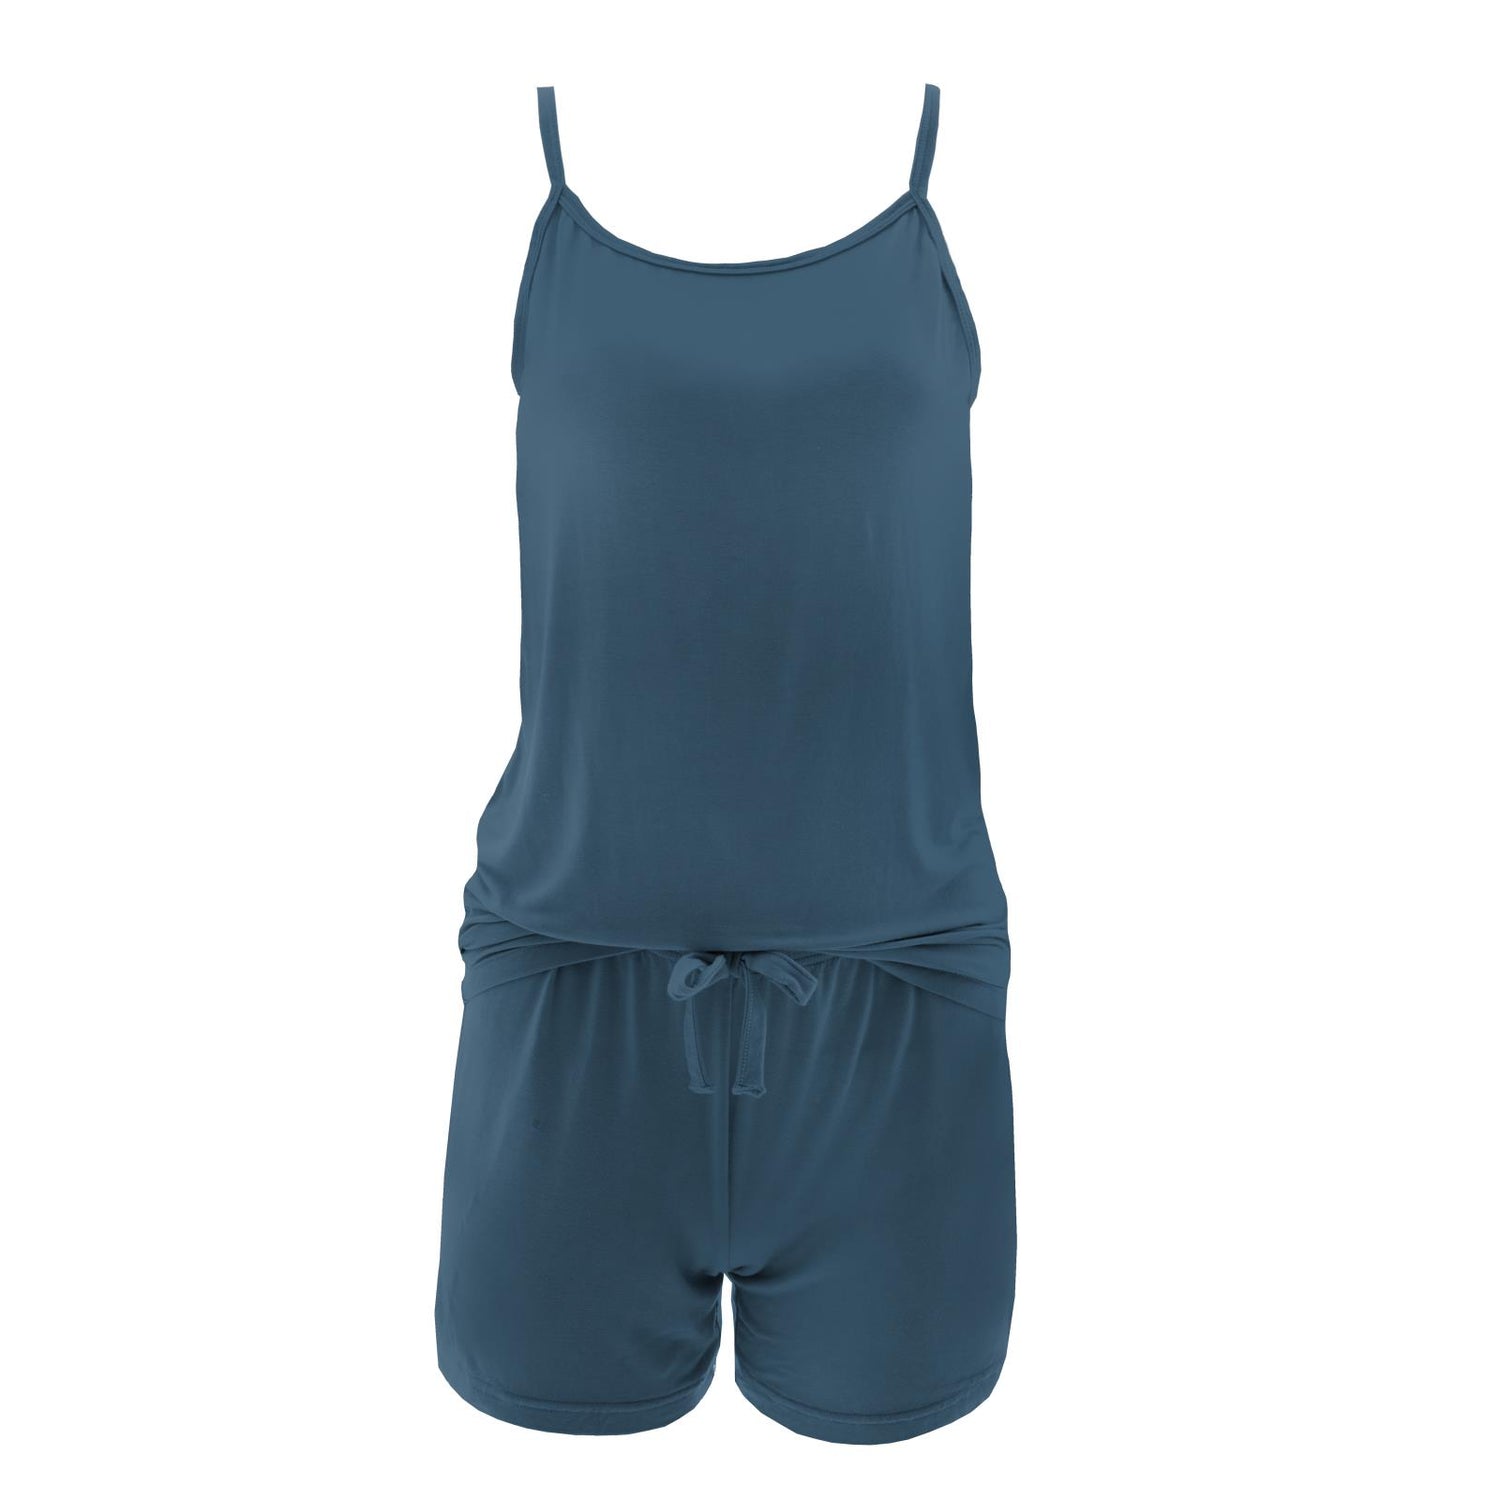 Women's Cami and Lounge Shorts Set in Deep Sea